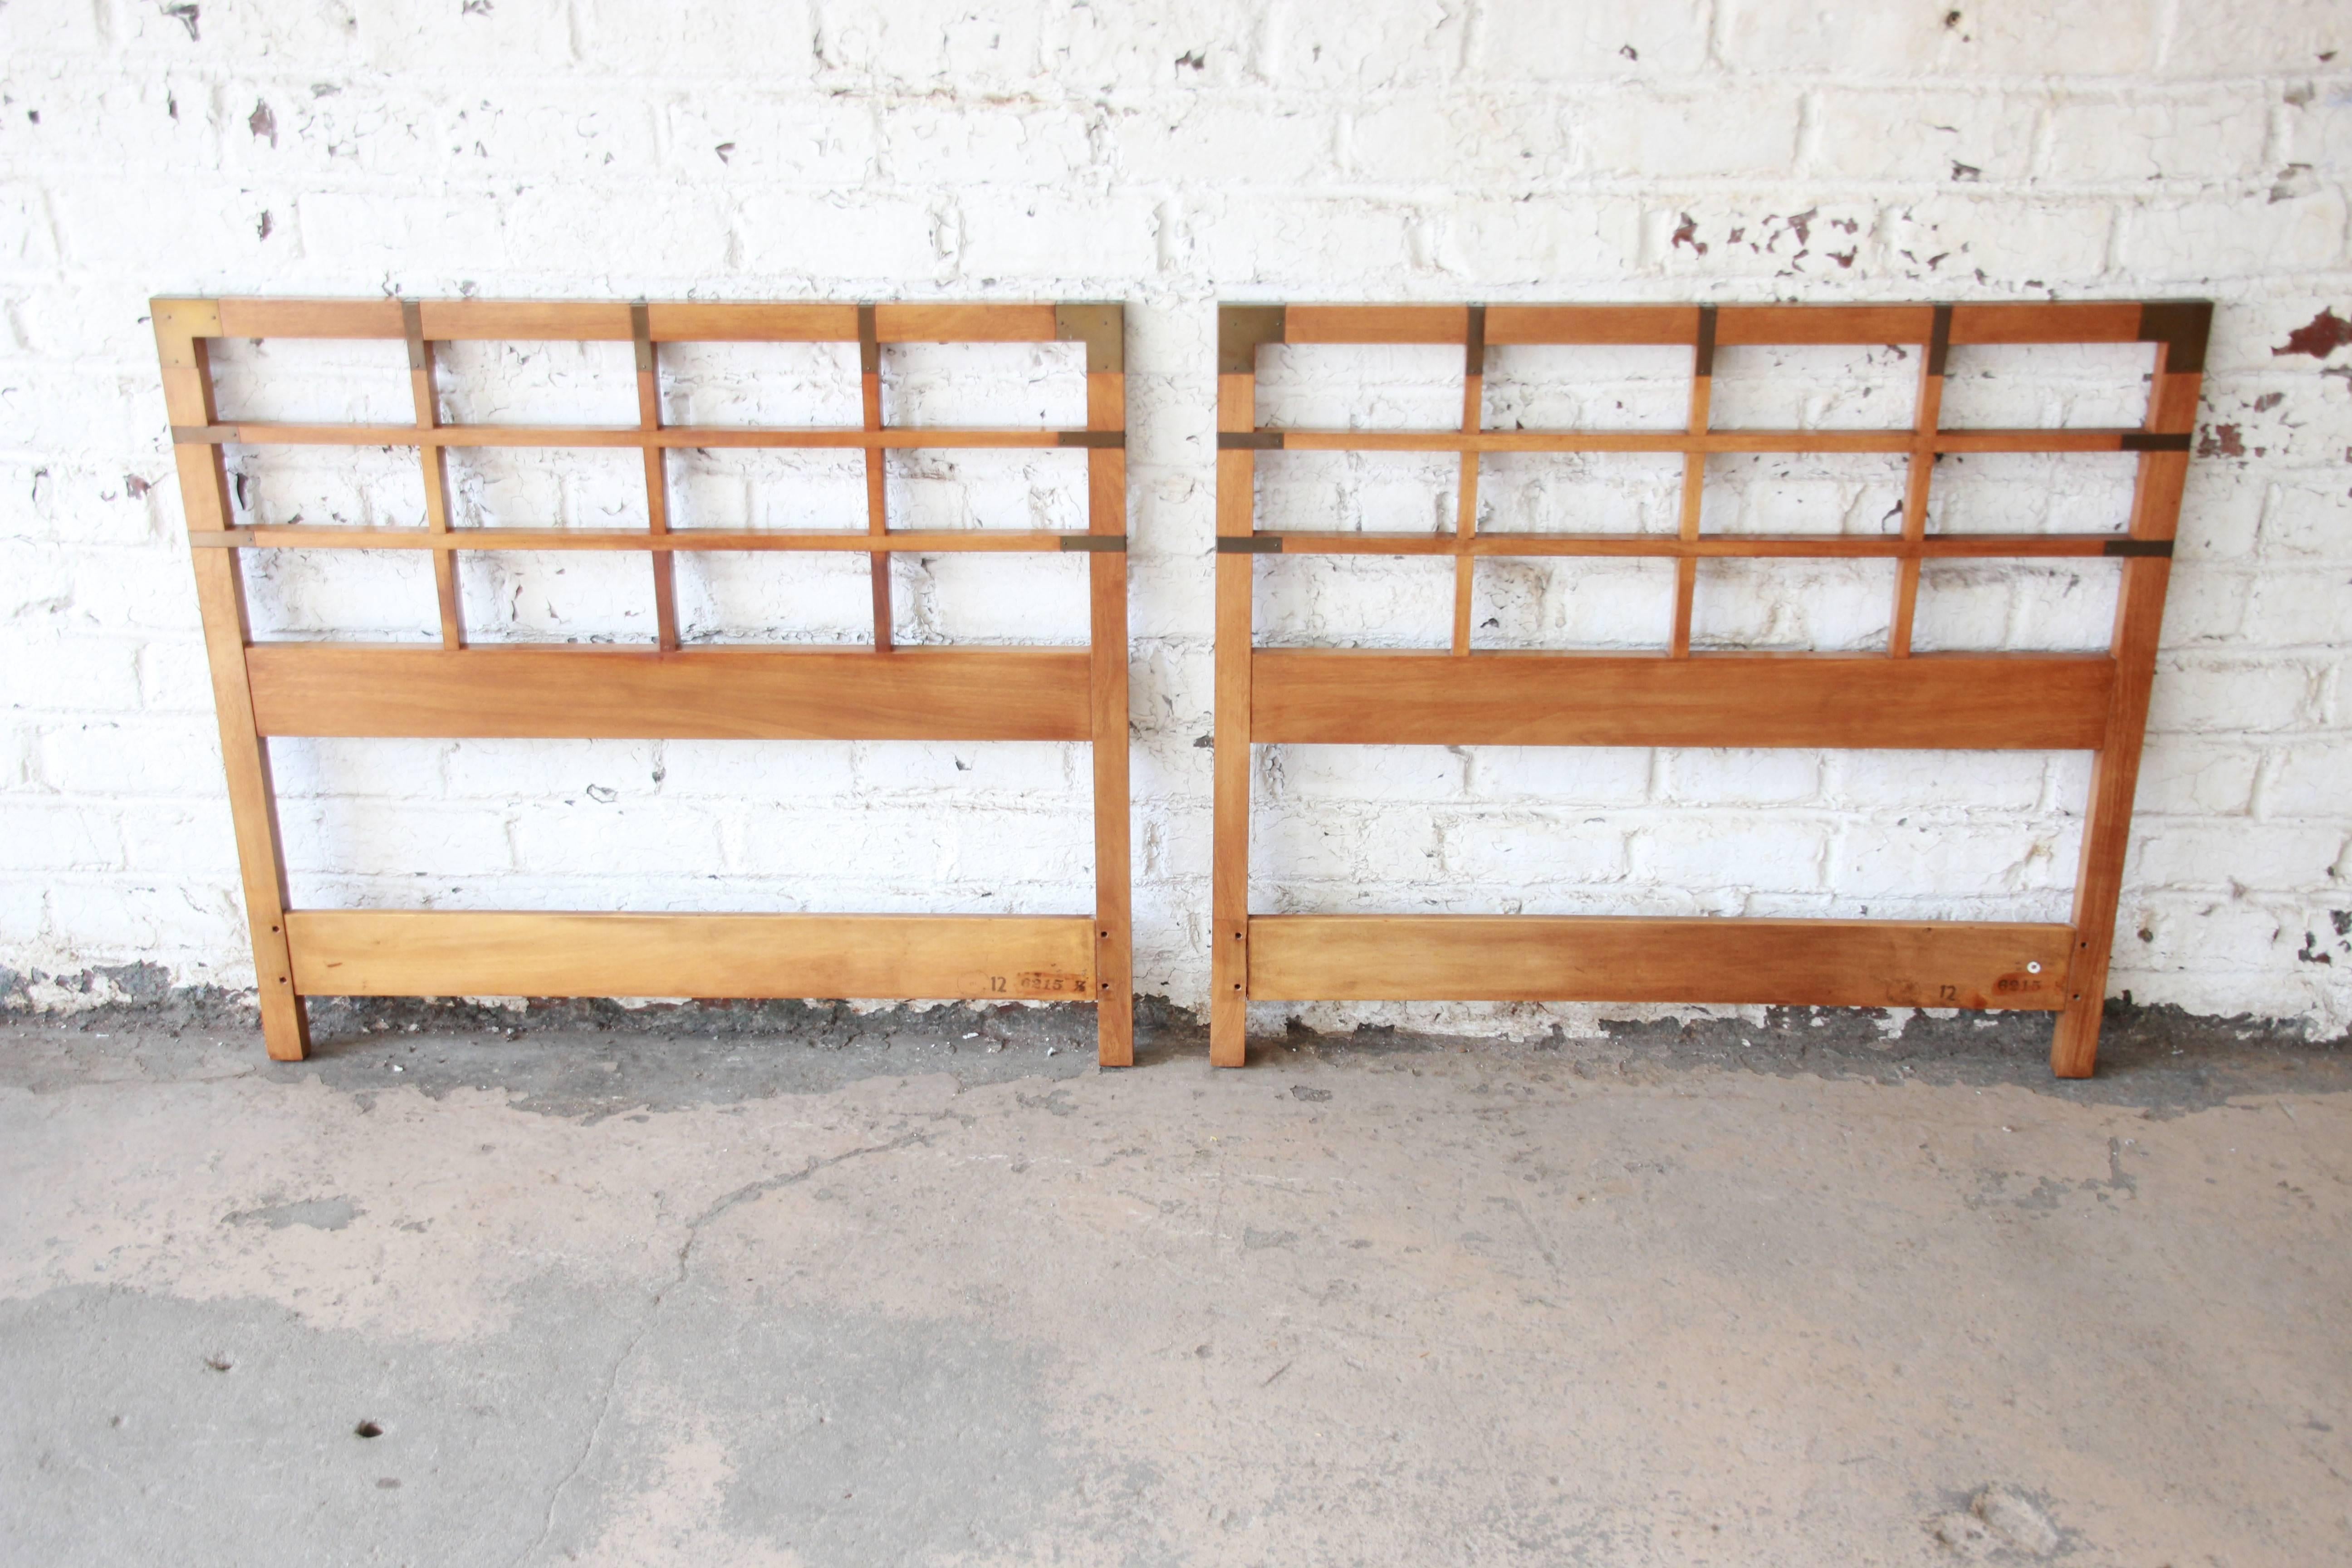 A beautiful pair of midcentury twin size Campaign style headboards from the Milling Road line by Baker Furniture. The headboards have nice brass details and clean midcentury lines. They can be placed together to form a king-size headboard. They are